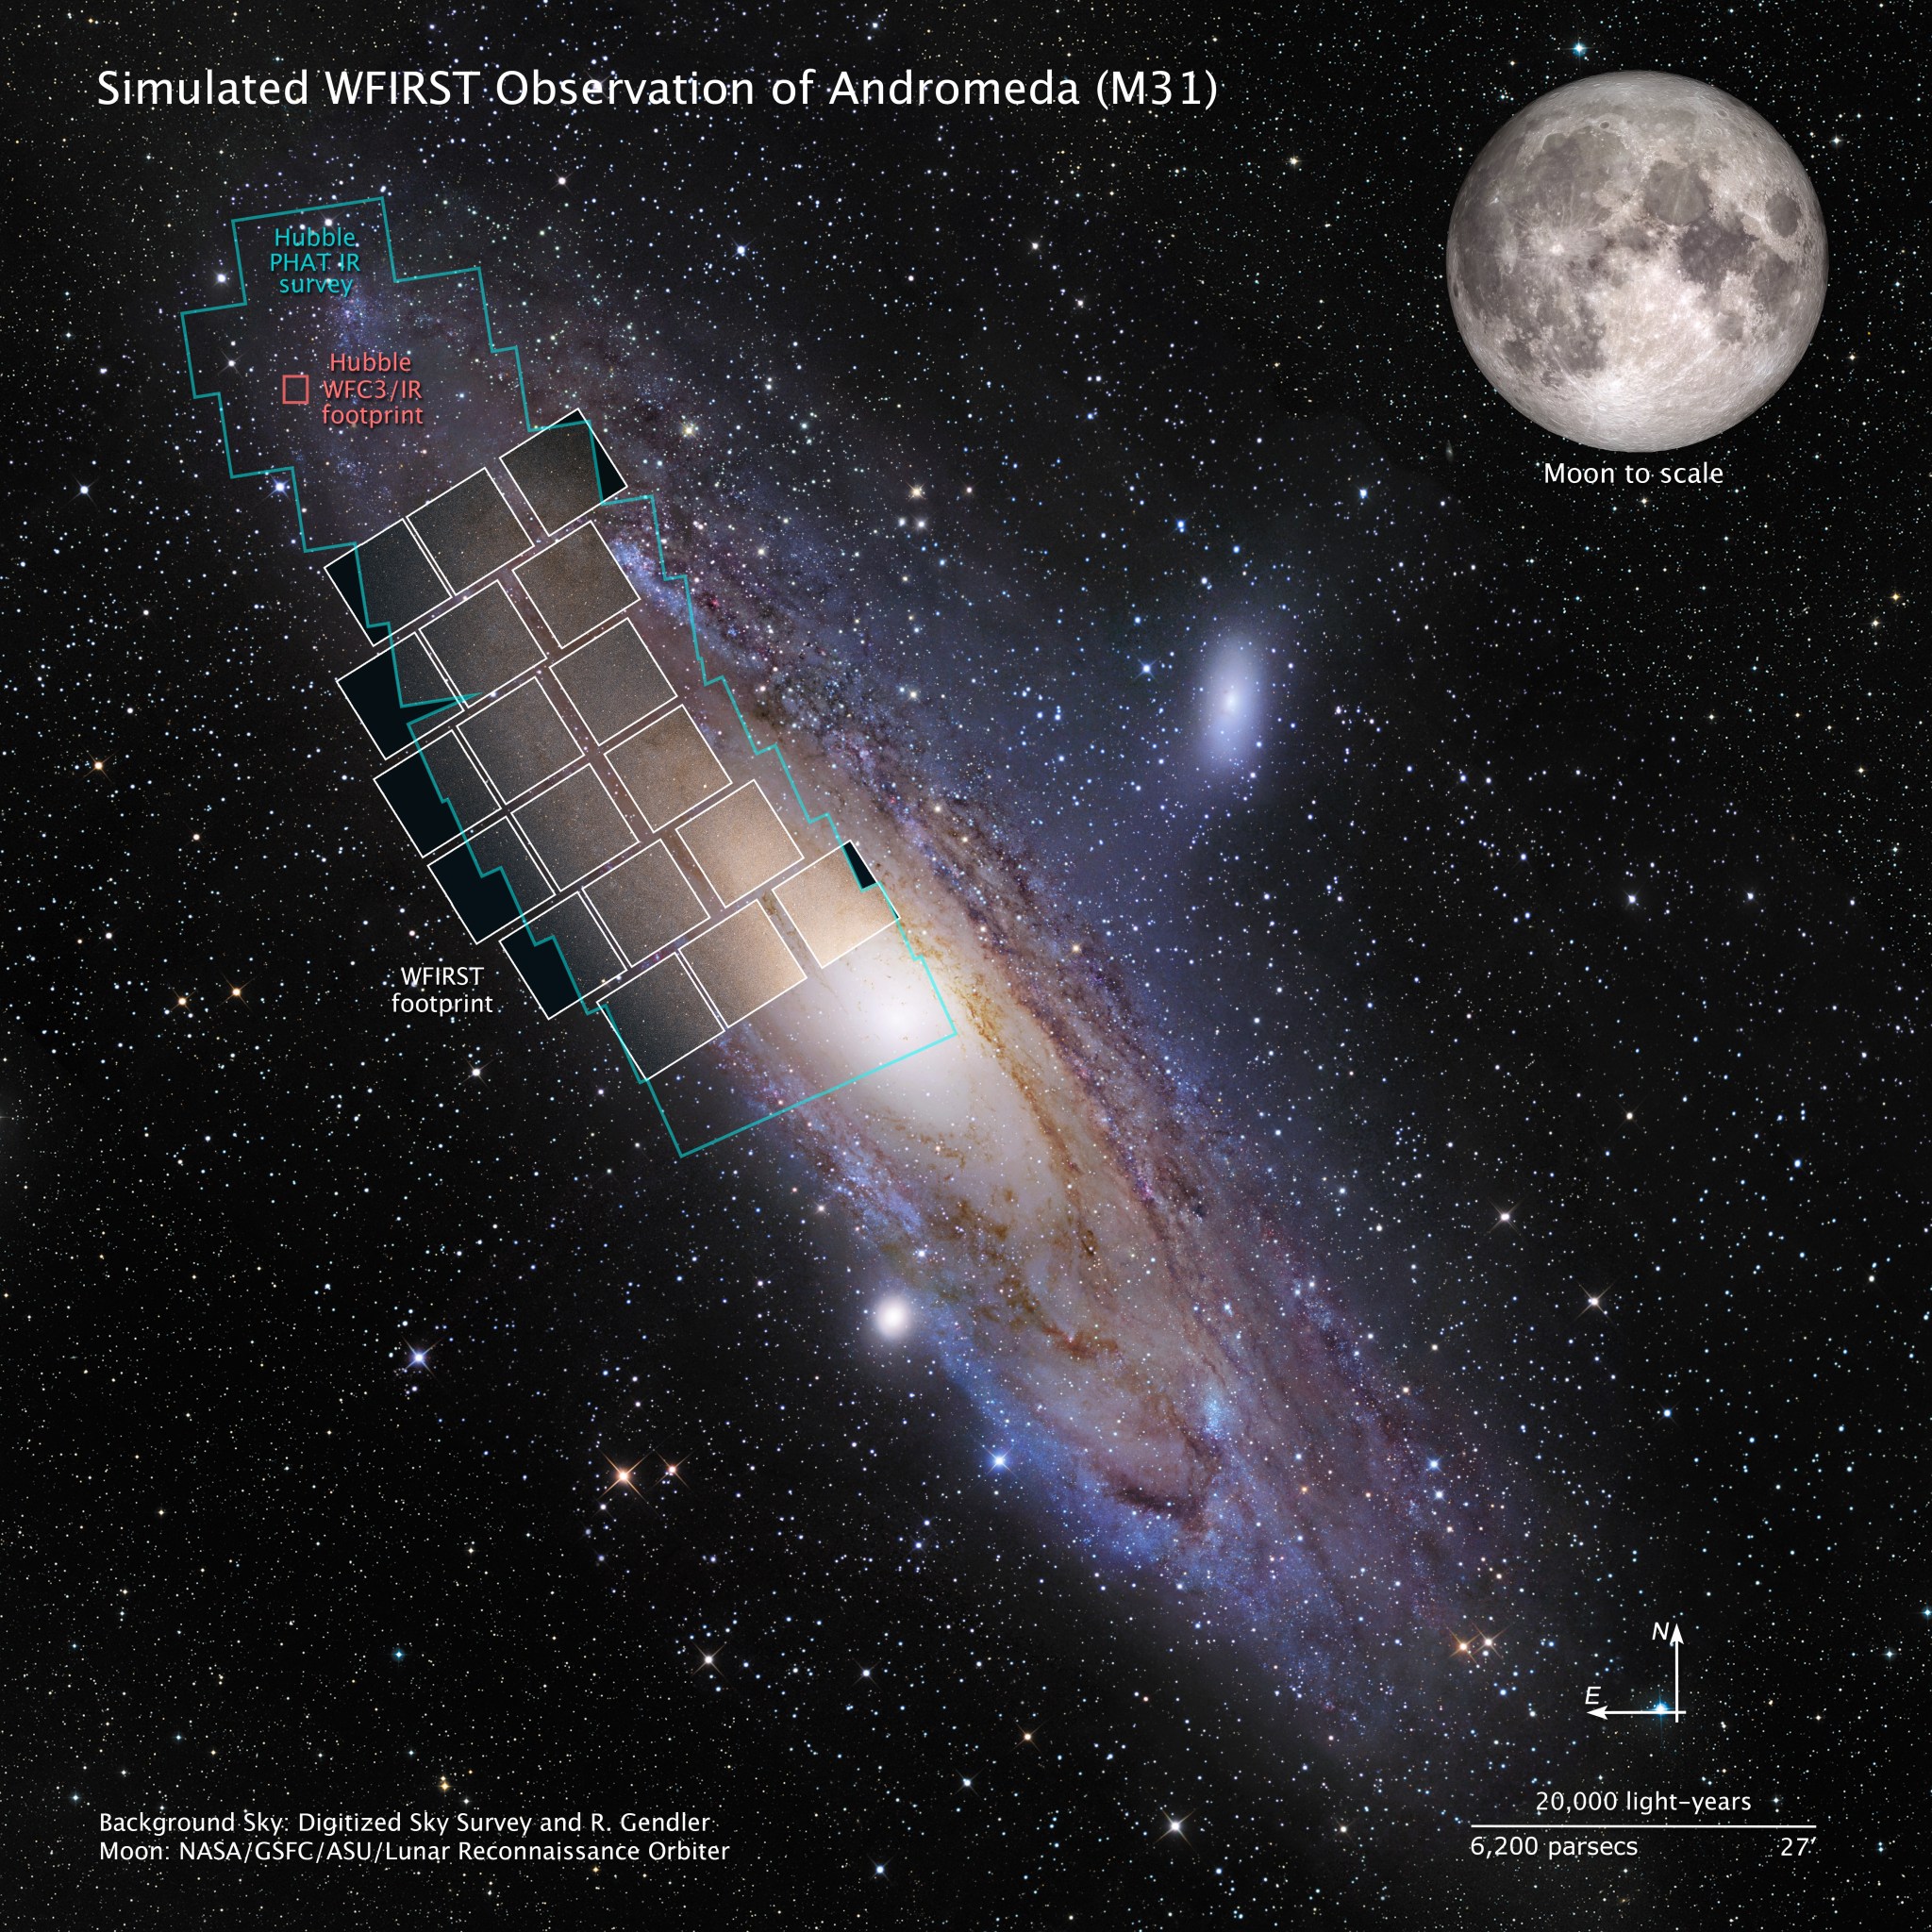 This graphic shows a simulation of a WFIRST observation of M31